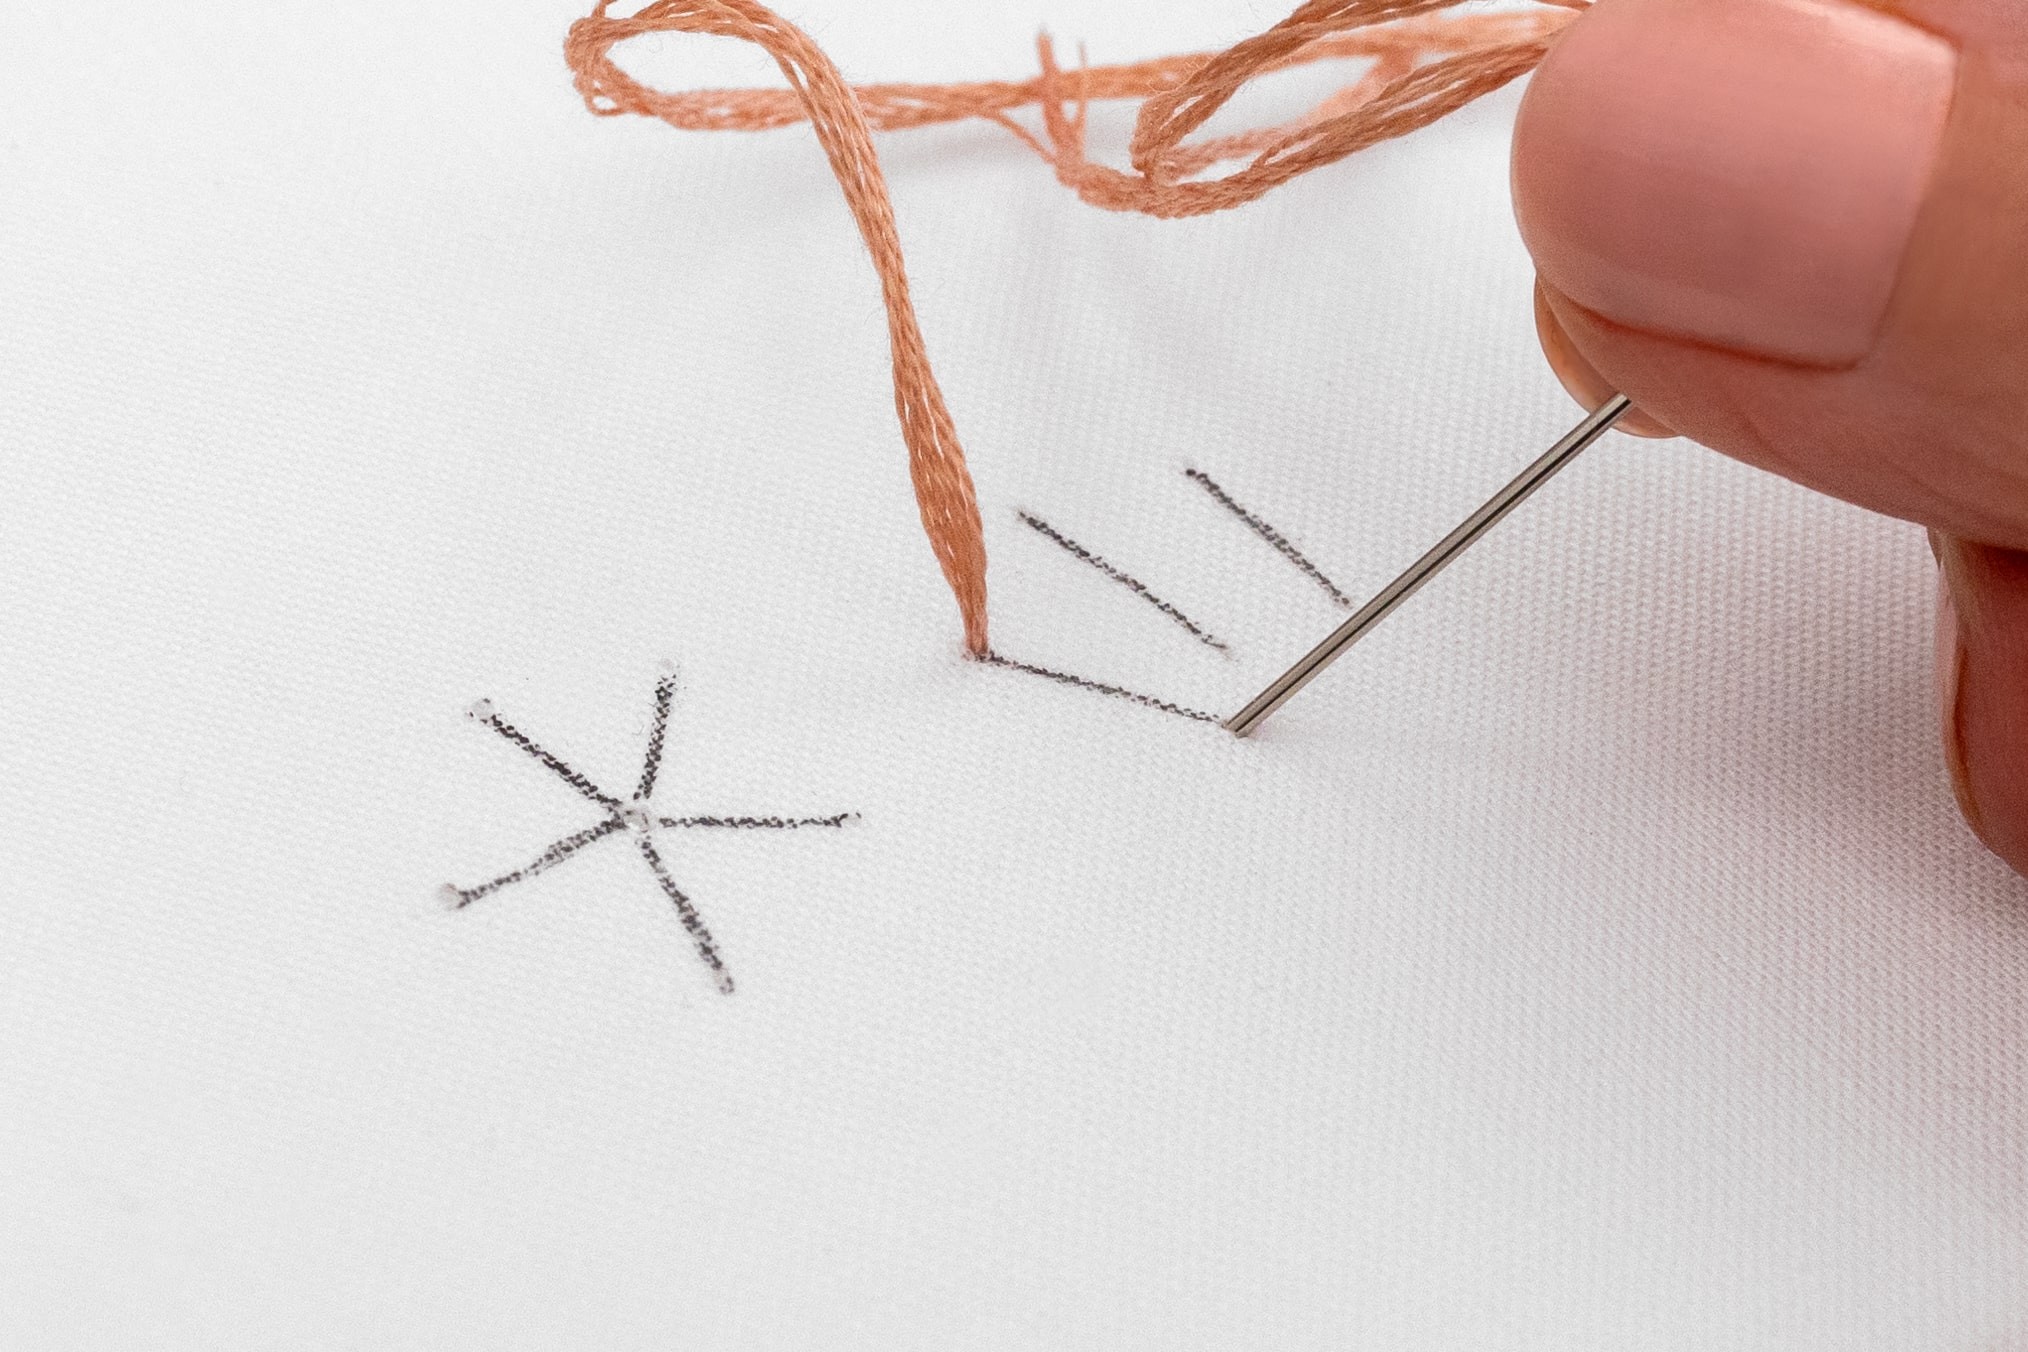 A needle pokes down at the end of a stitch.